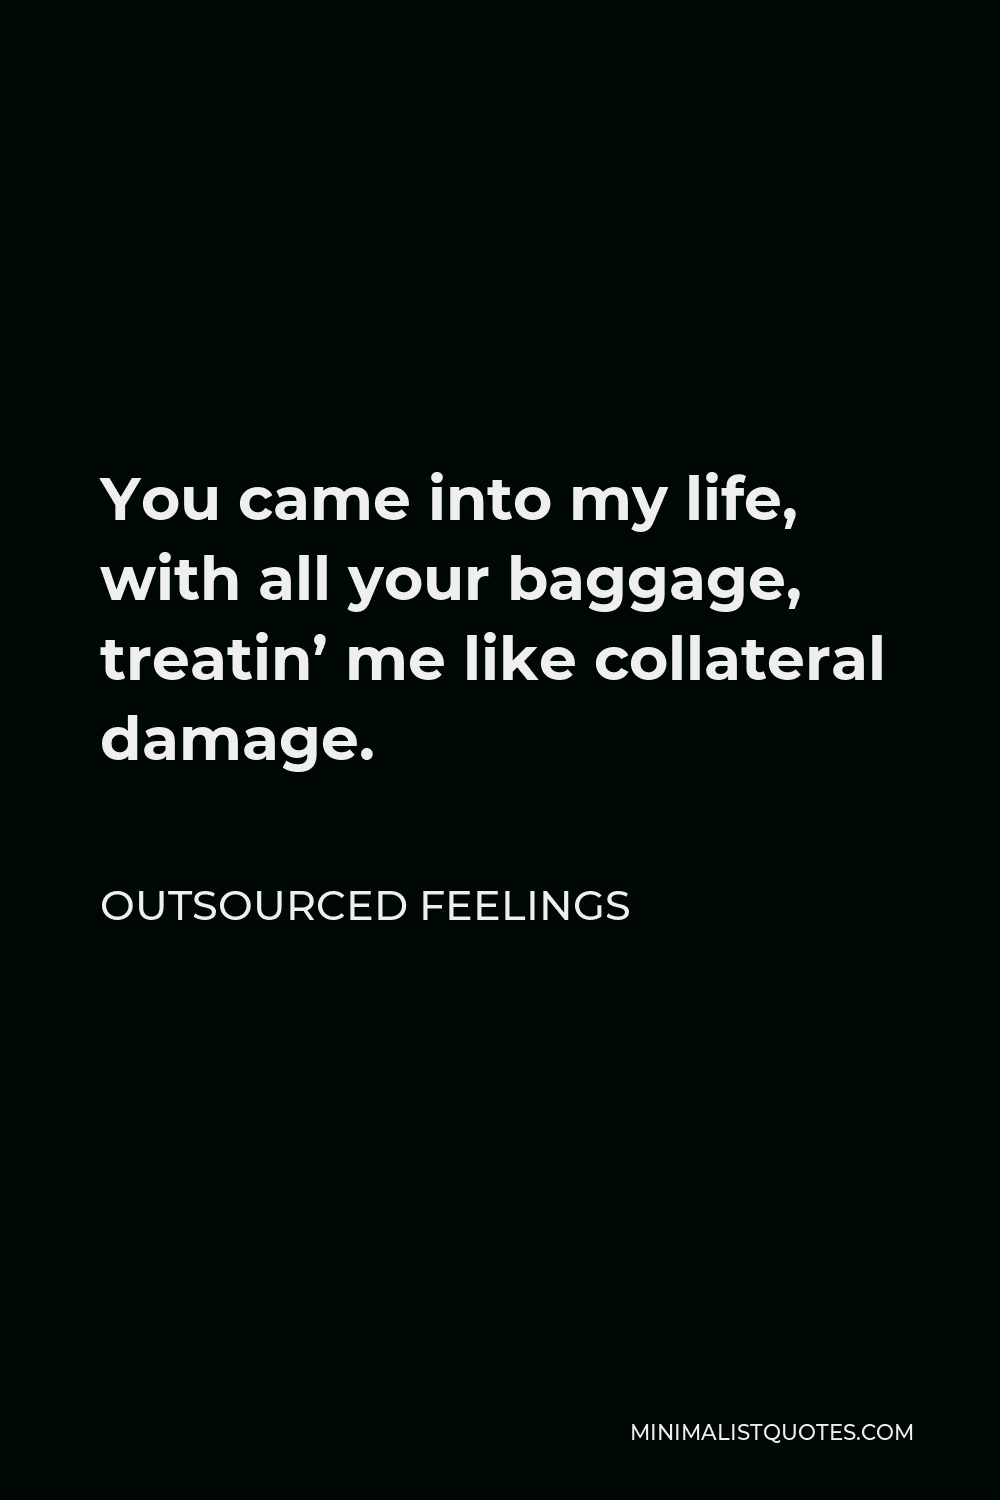 Outsourced Feelings Quote - You came into my life, with all your baggage, treatin’ me like collateral damage.